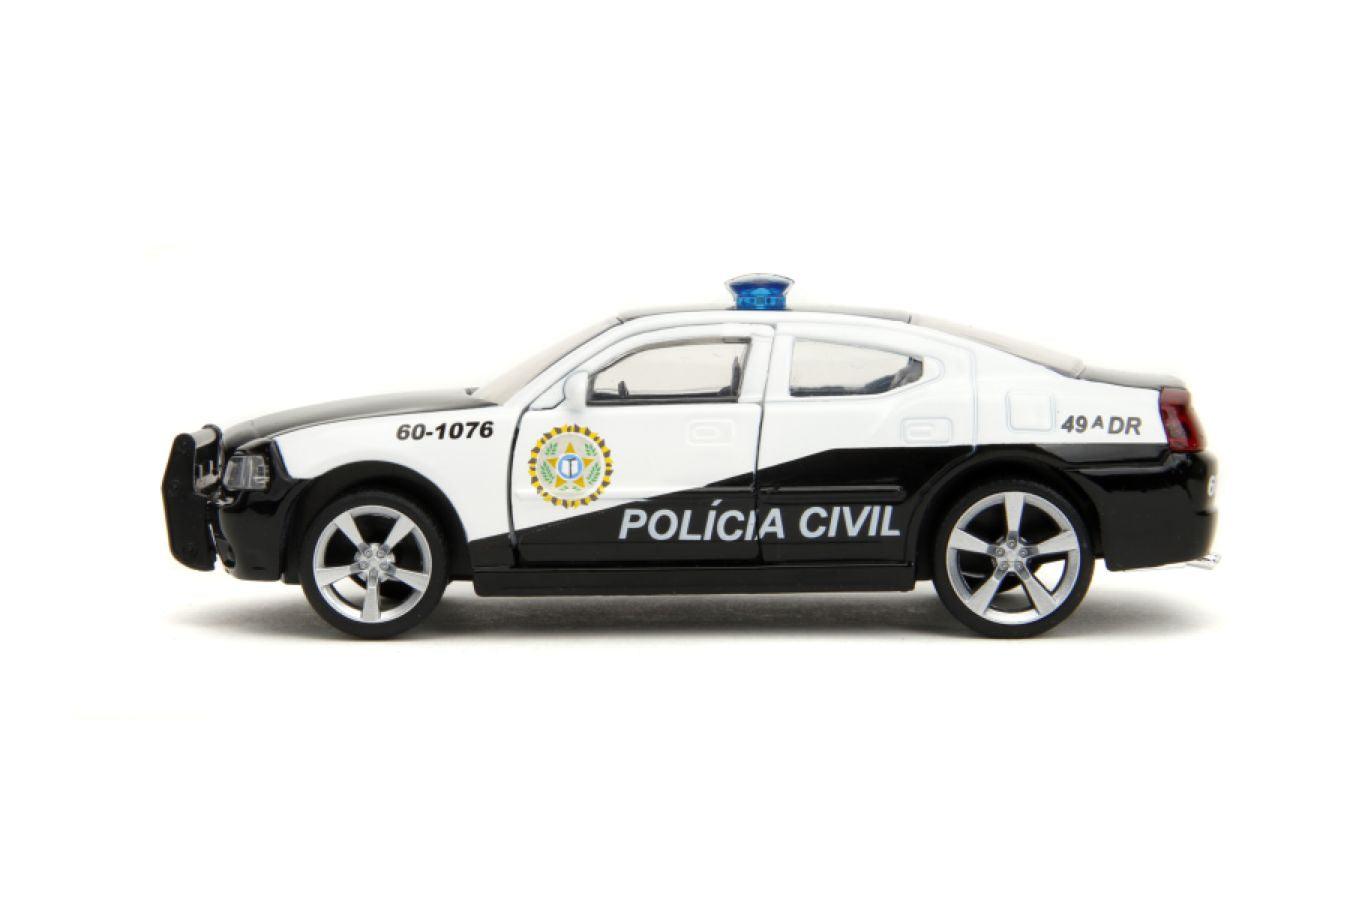 JAD33666 Fast & Furious 5 - Dodge Charger Police Car 1:32 Scale Hollywood Rides Diecast Vehicle - Jada Toys - Titan Pop Culture